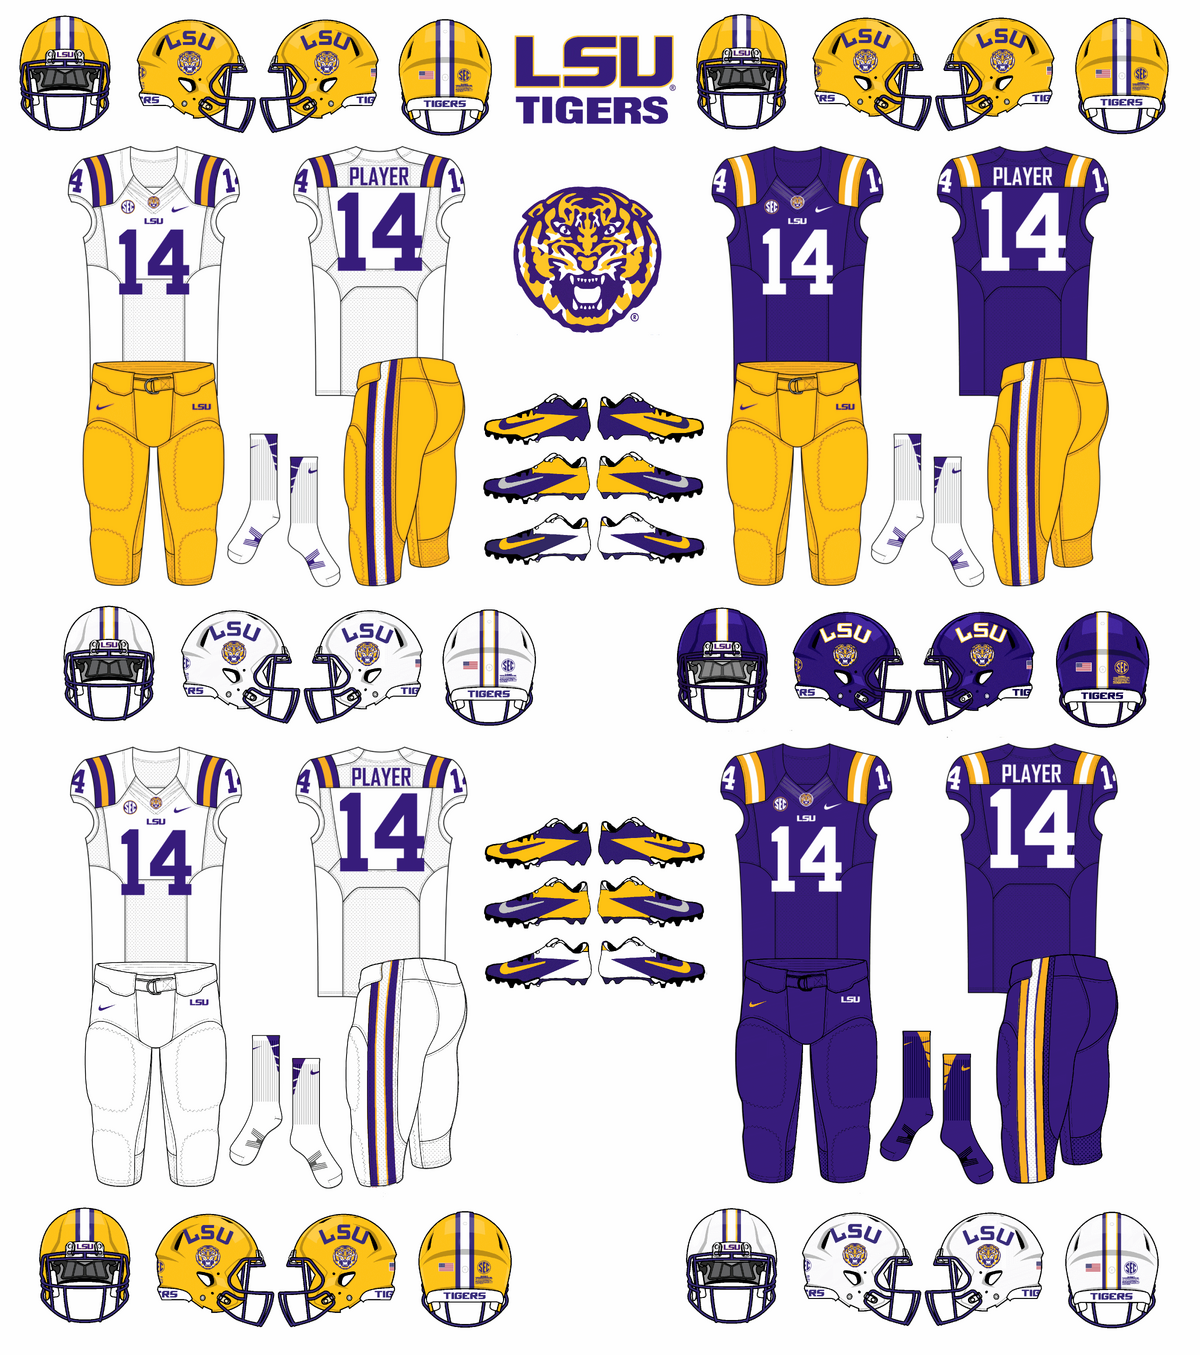 EXCLUSIVE: Tigers Focus-Grouping New Throwbacks